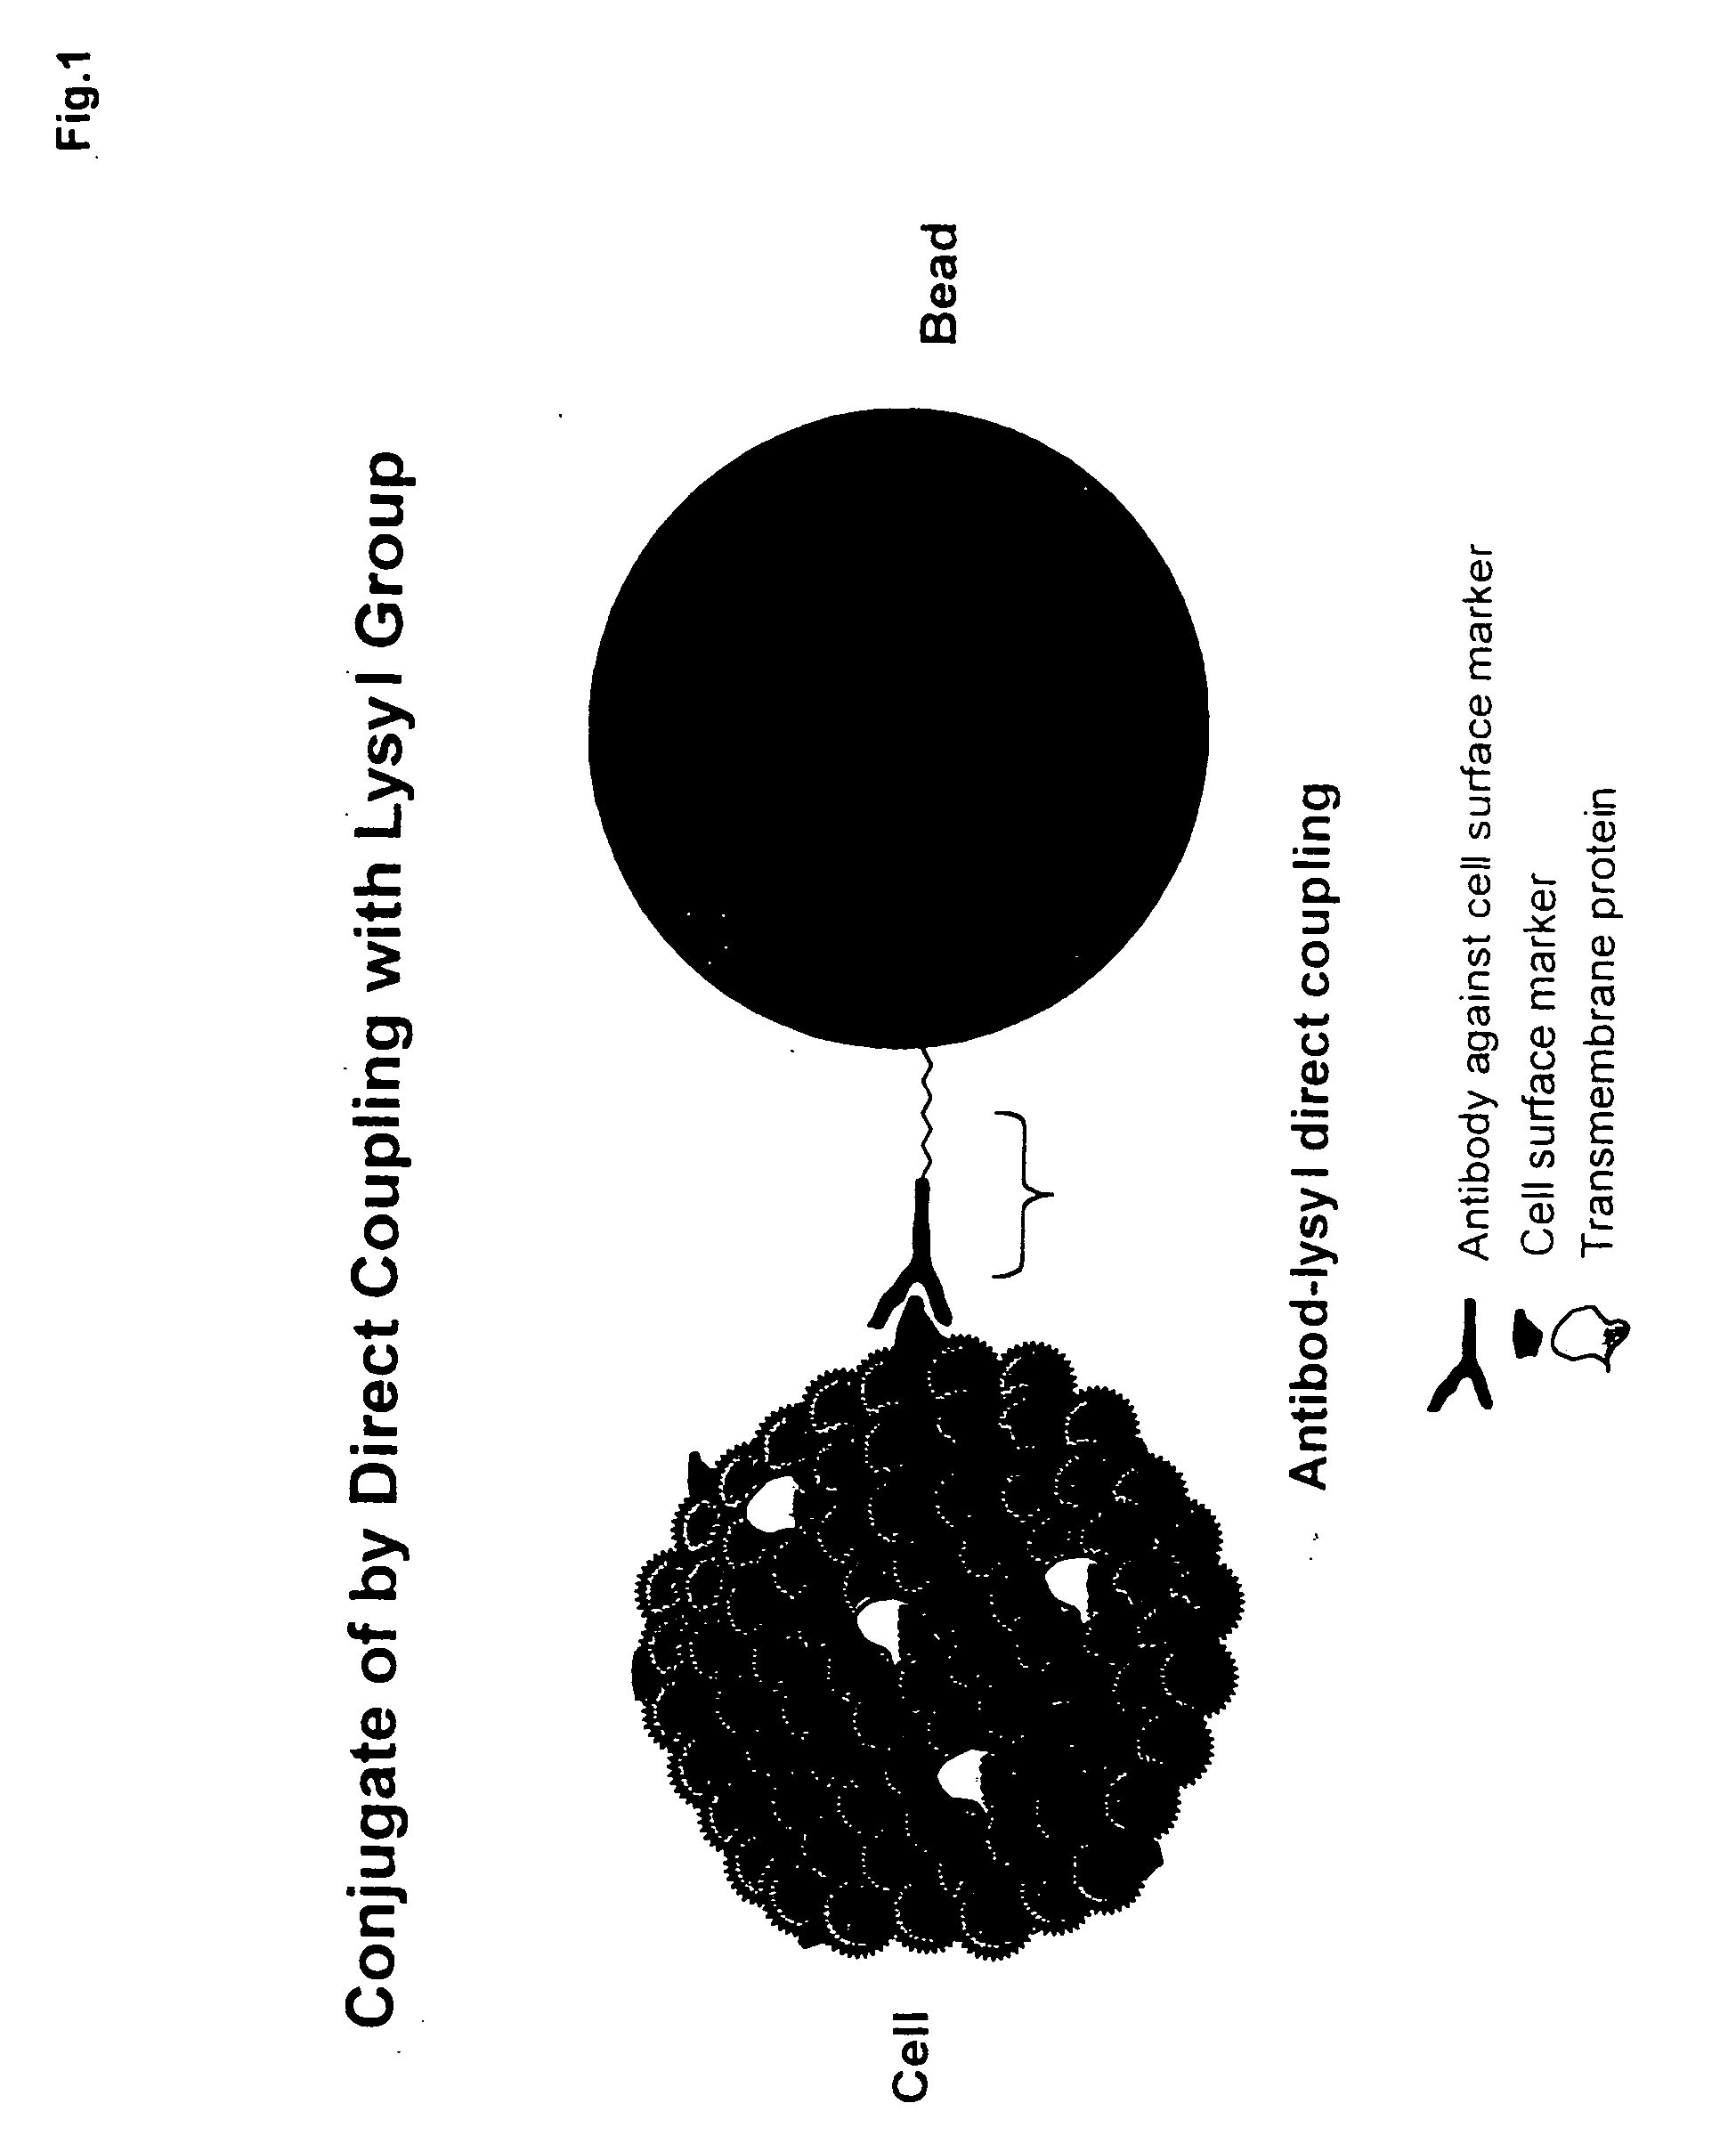 Biodegradable polymer-ligand conjugates and their uses in isolation of cellular subpolulations and in cryopreservation, culture and transplantation of cells